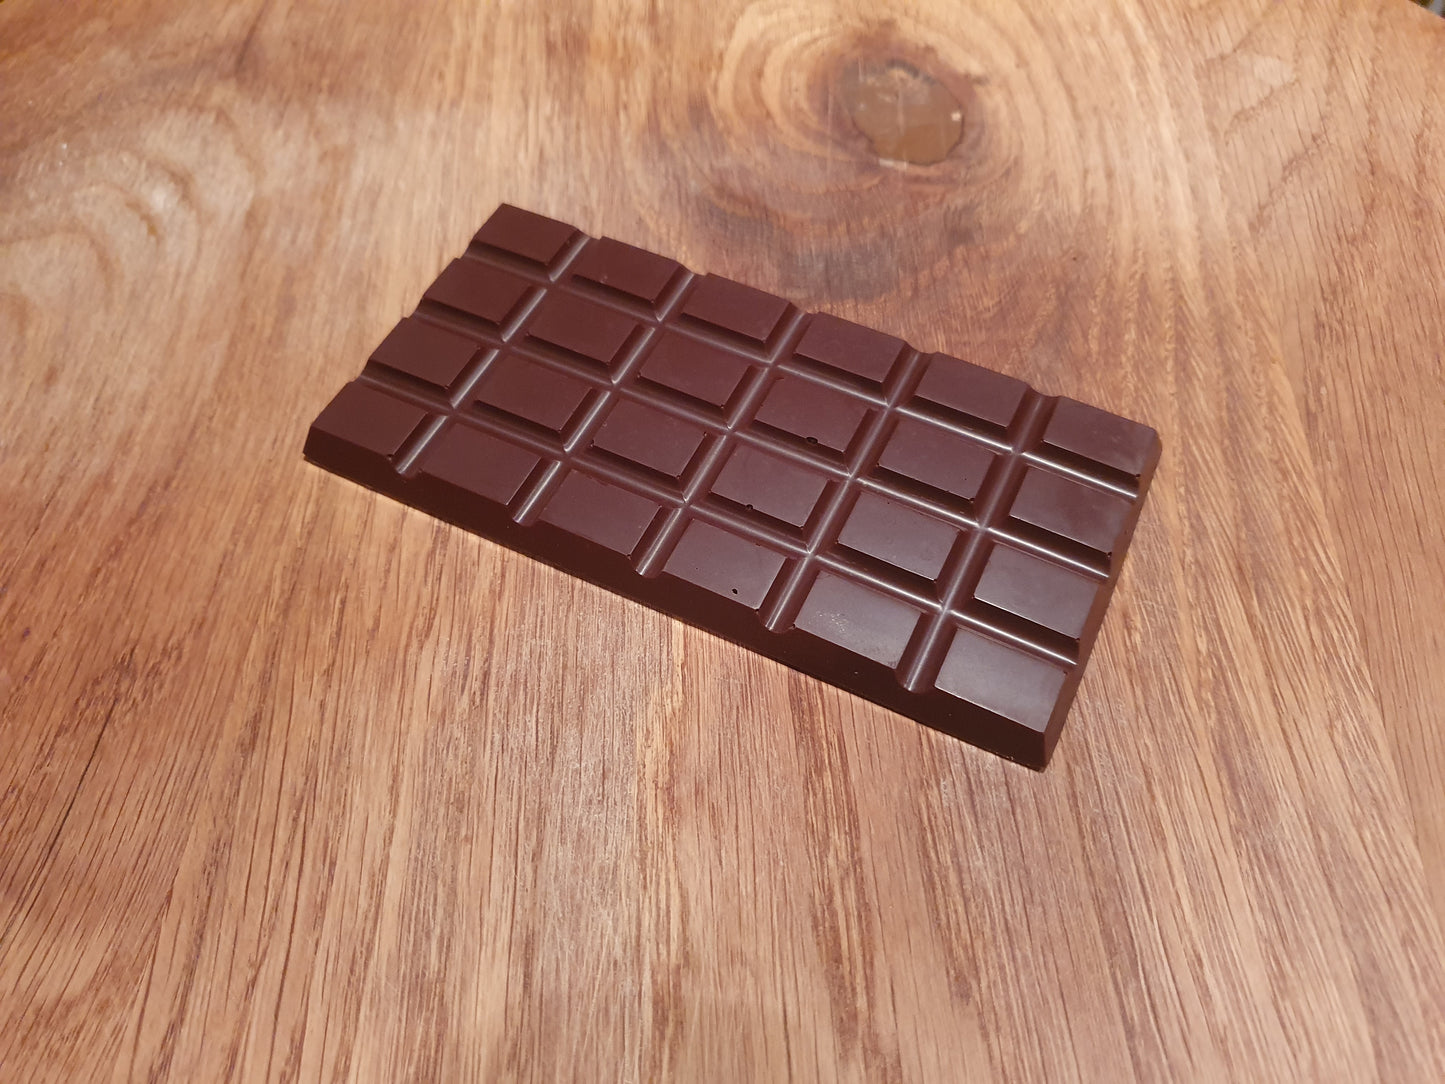 Handmade Belgian Chocolate Bars- CHOOSE YOUR OWN Mix of 6